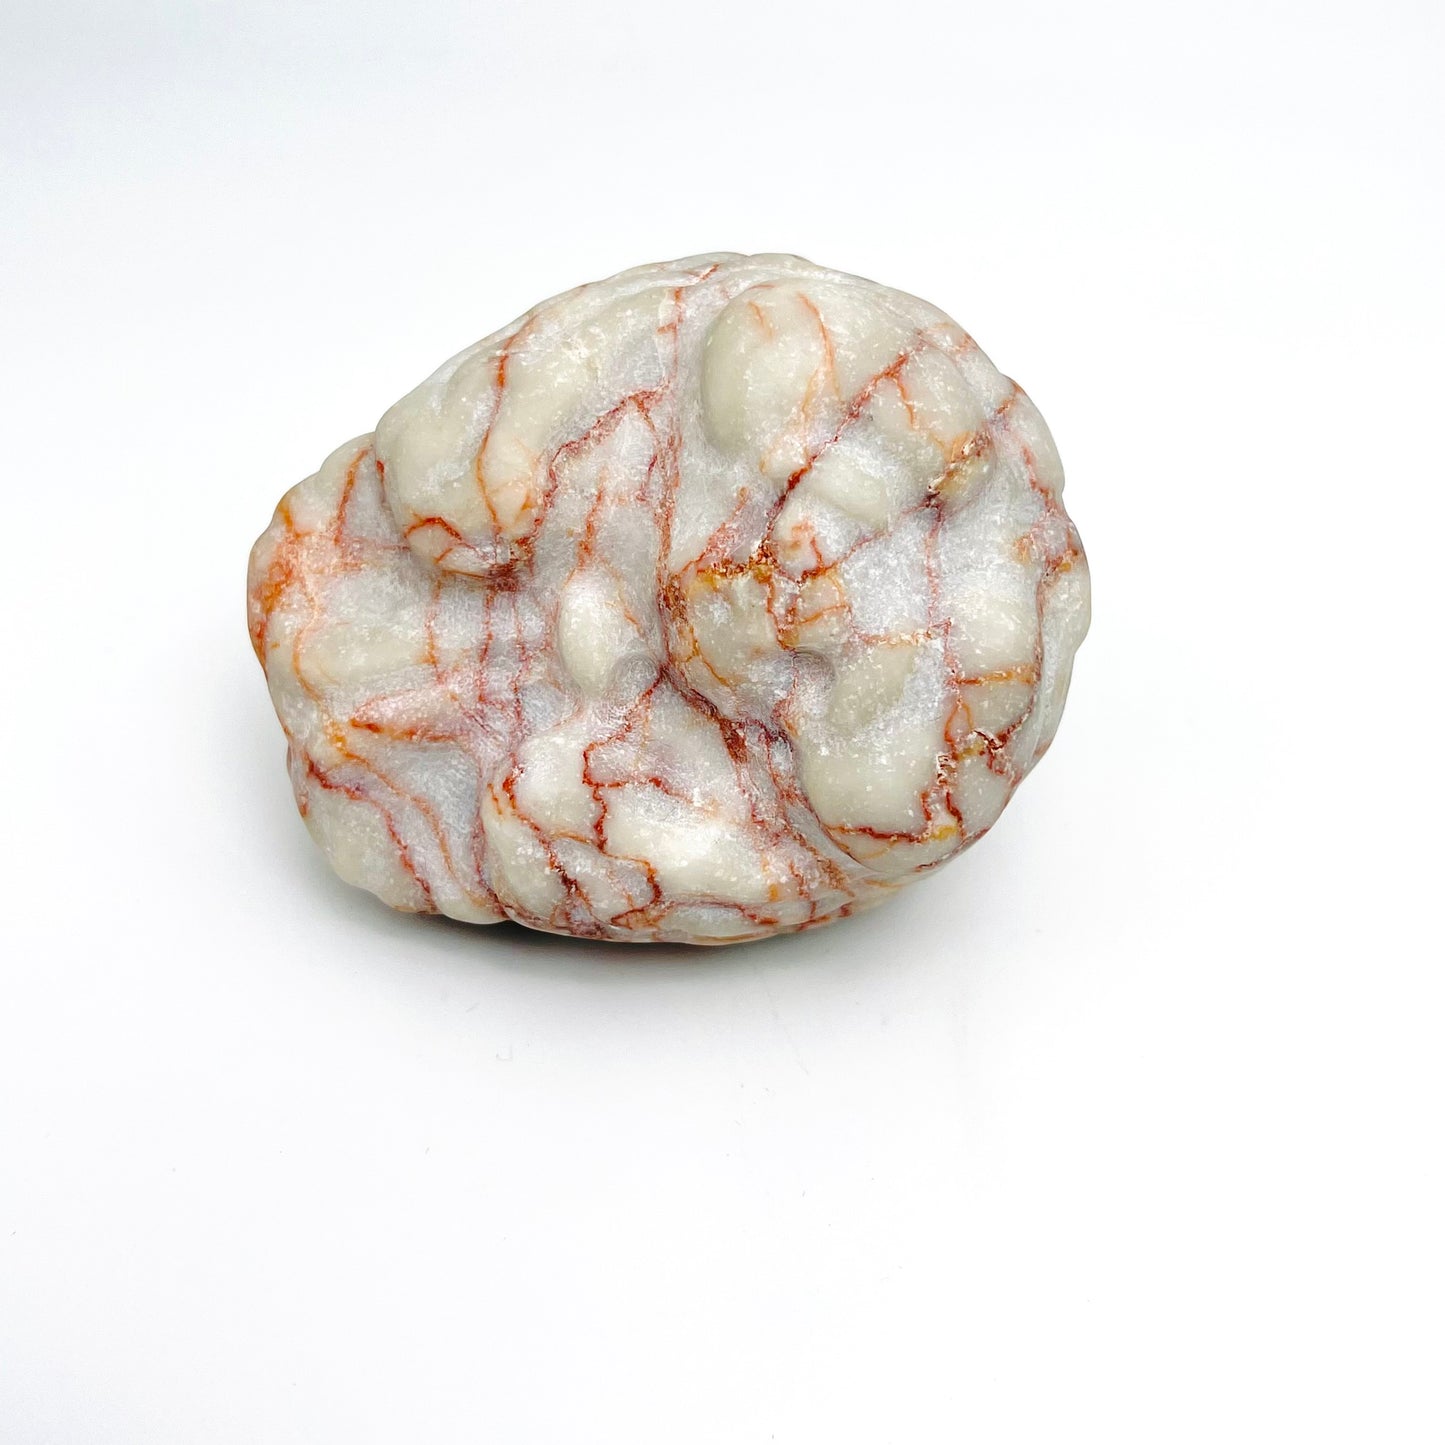 【A1】Meowcrystal Natural ore stone jasper carvings Human heart Human brain Design carvings Gothic style home ornaments